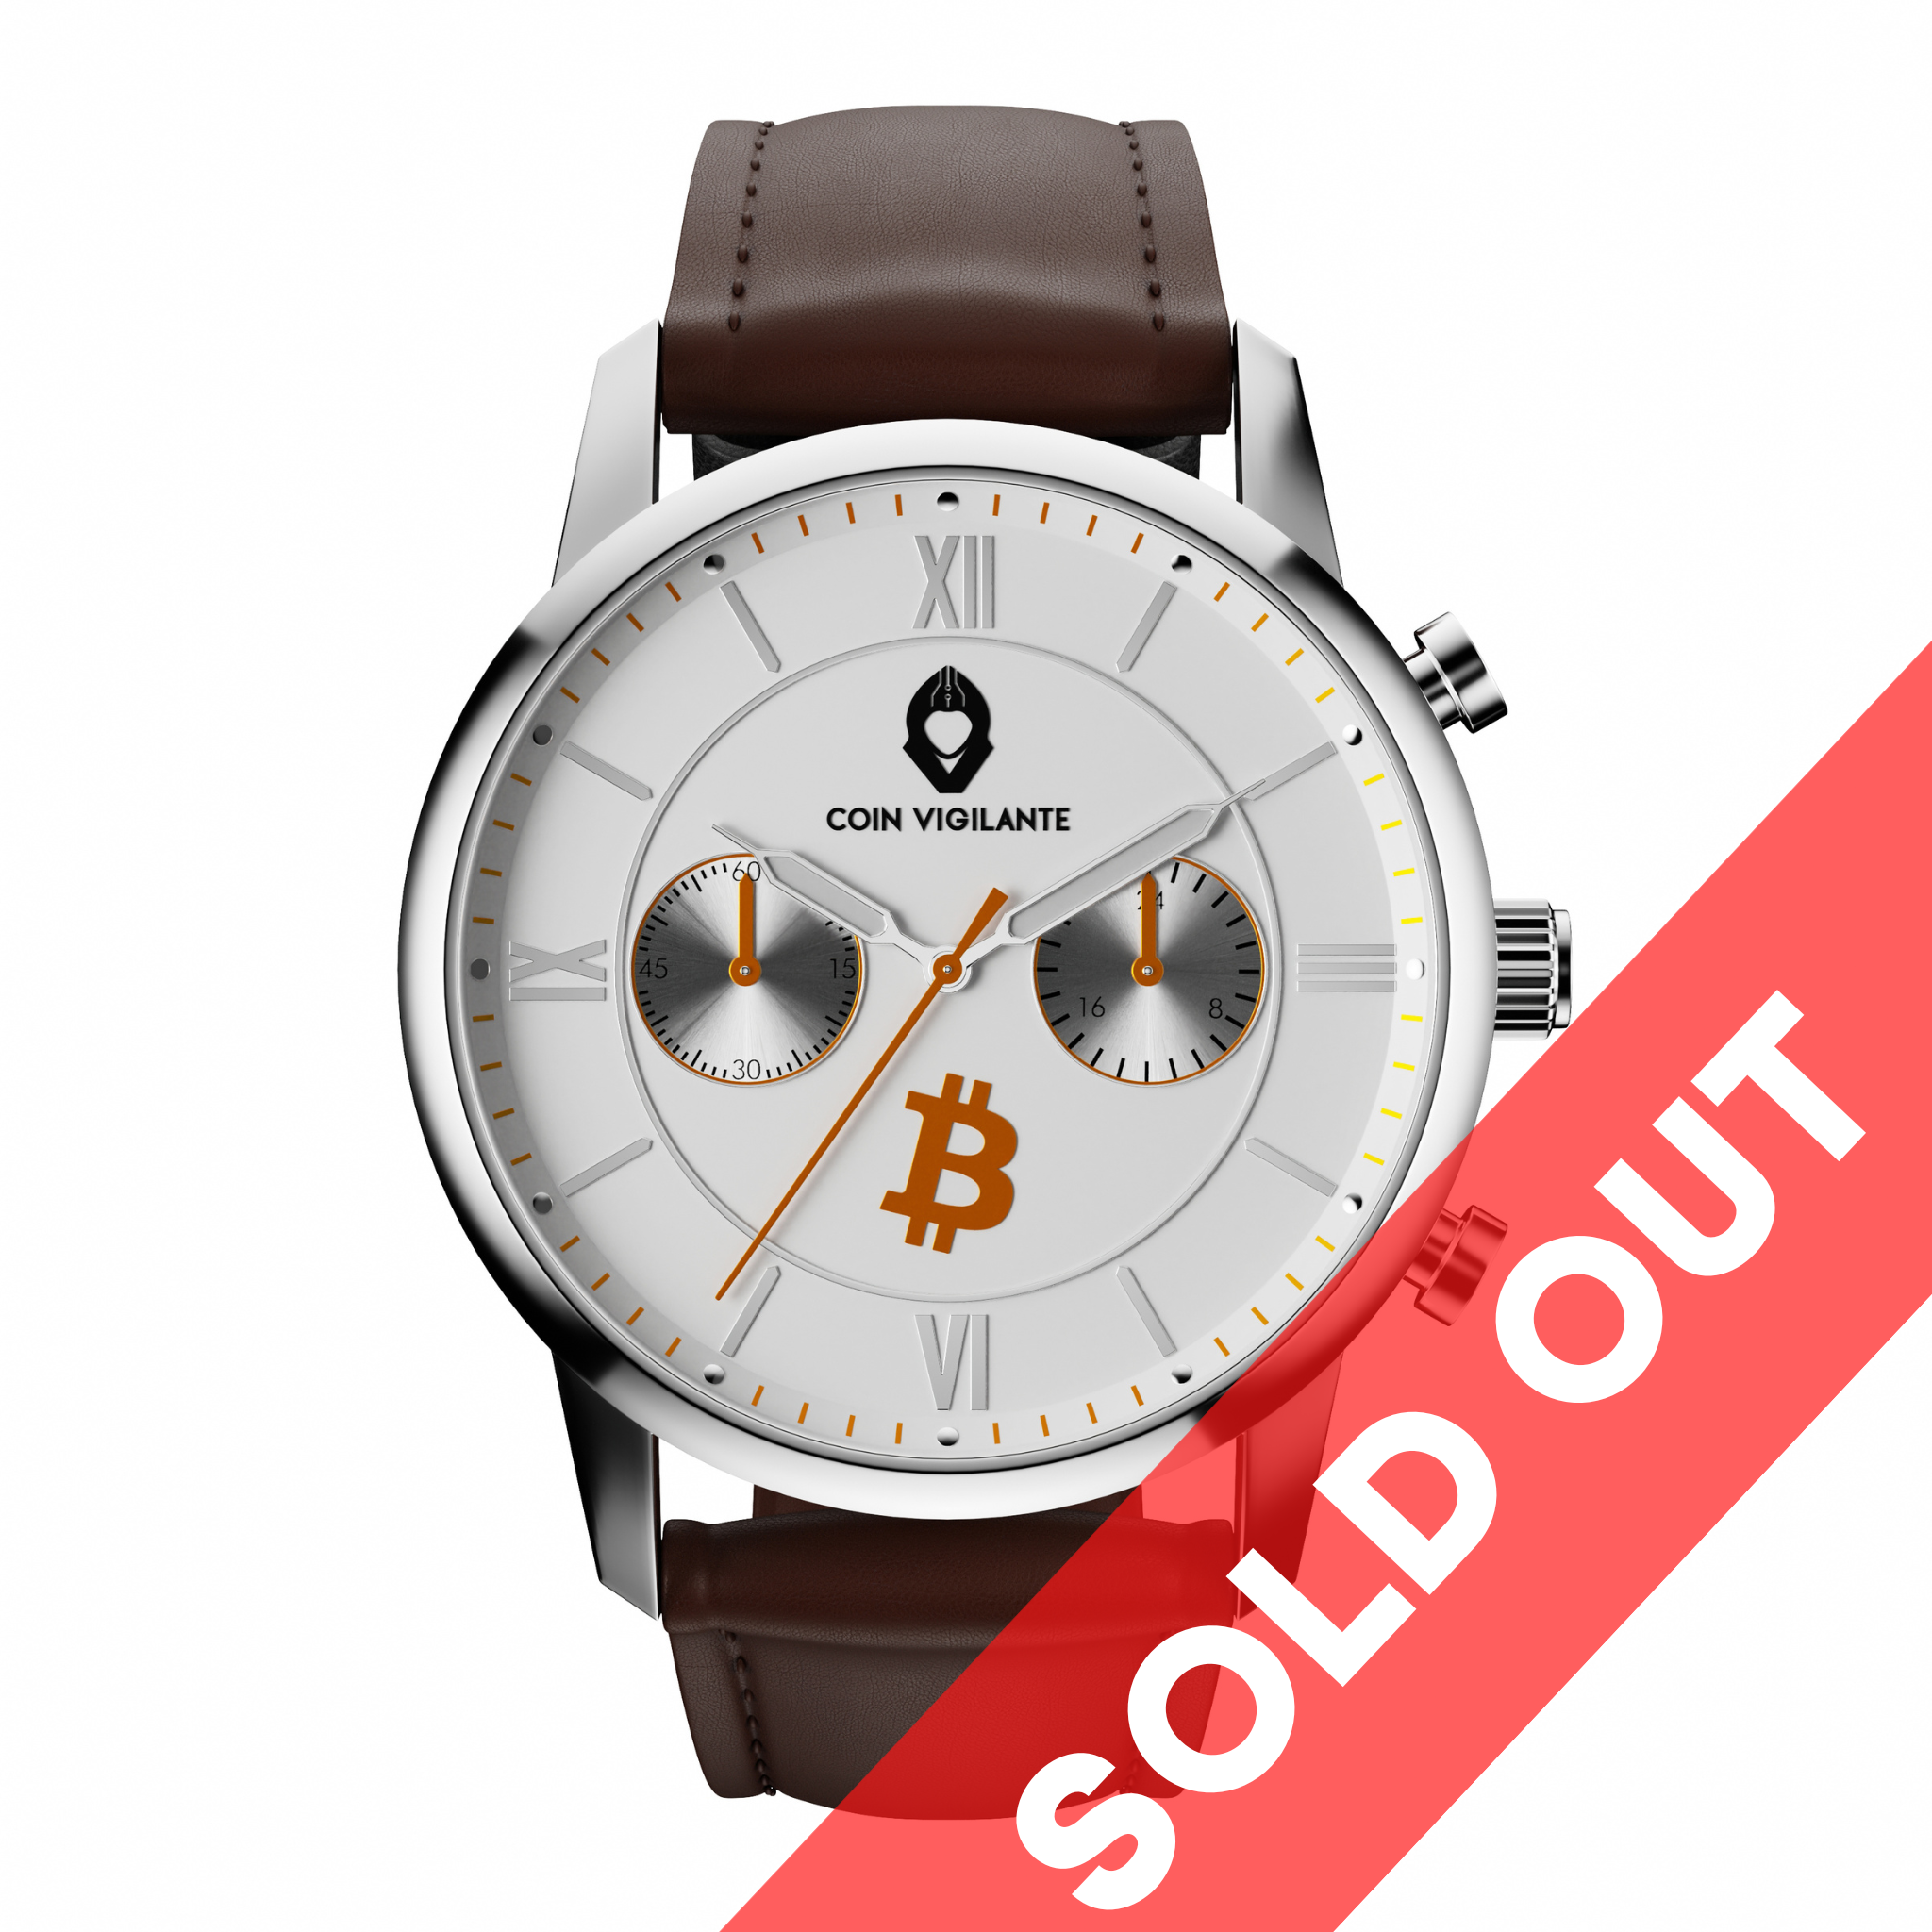 Bitcoin Watch Model B - First Limited Edition (Only 750 in existence)